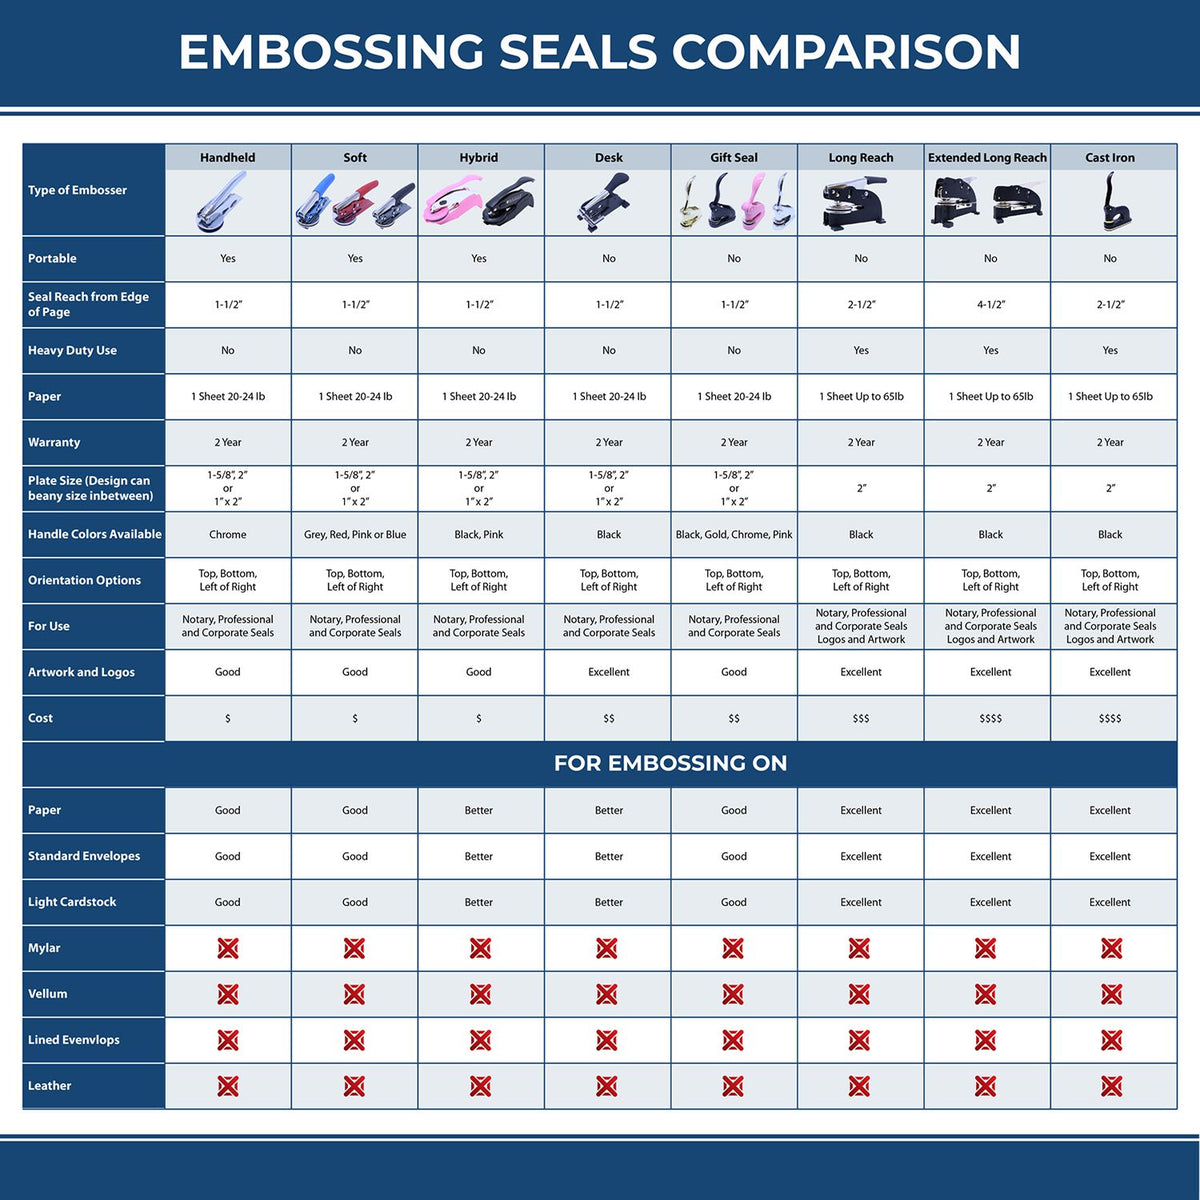 A comparison chart for the different types of mount models available for the Heavy Duty Cast Iron Tennessee Engineer Seal Embosser.